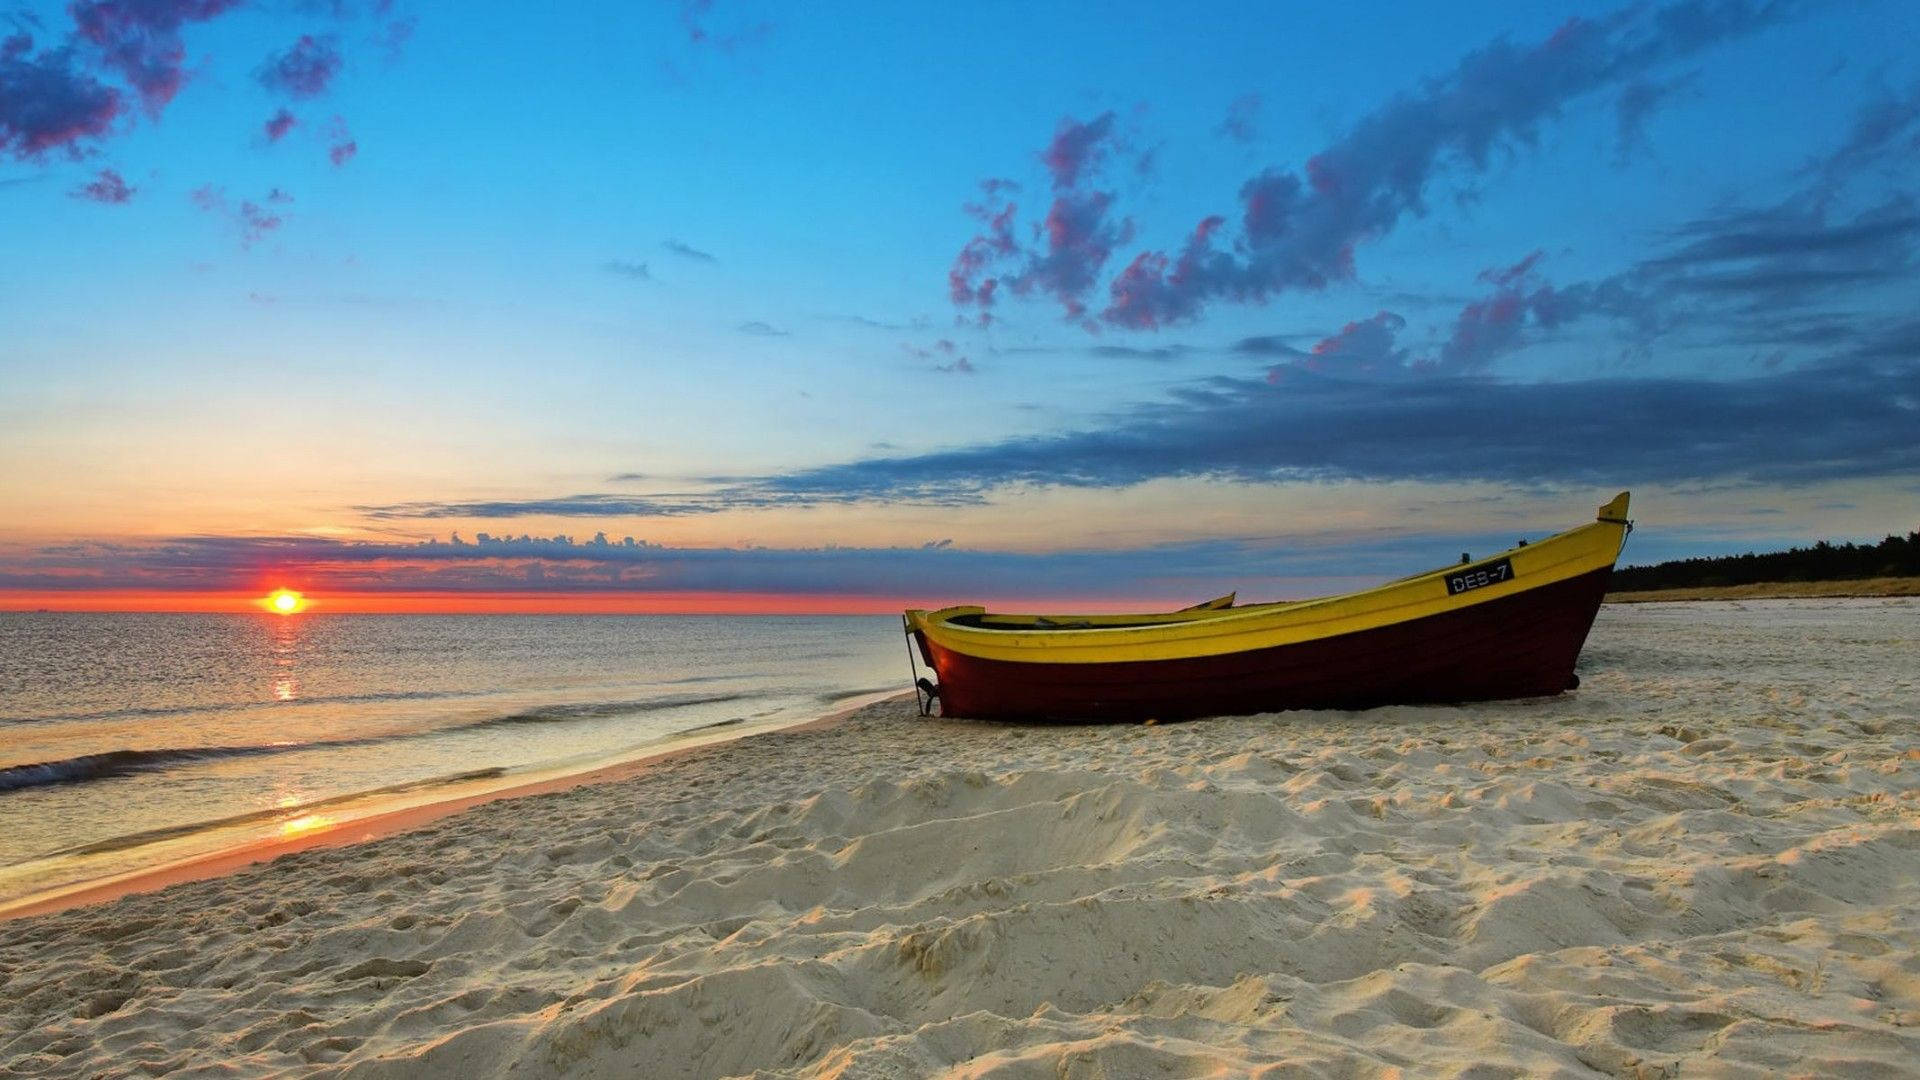 A Boat On The Beach At Sunset Wallpaper